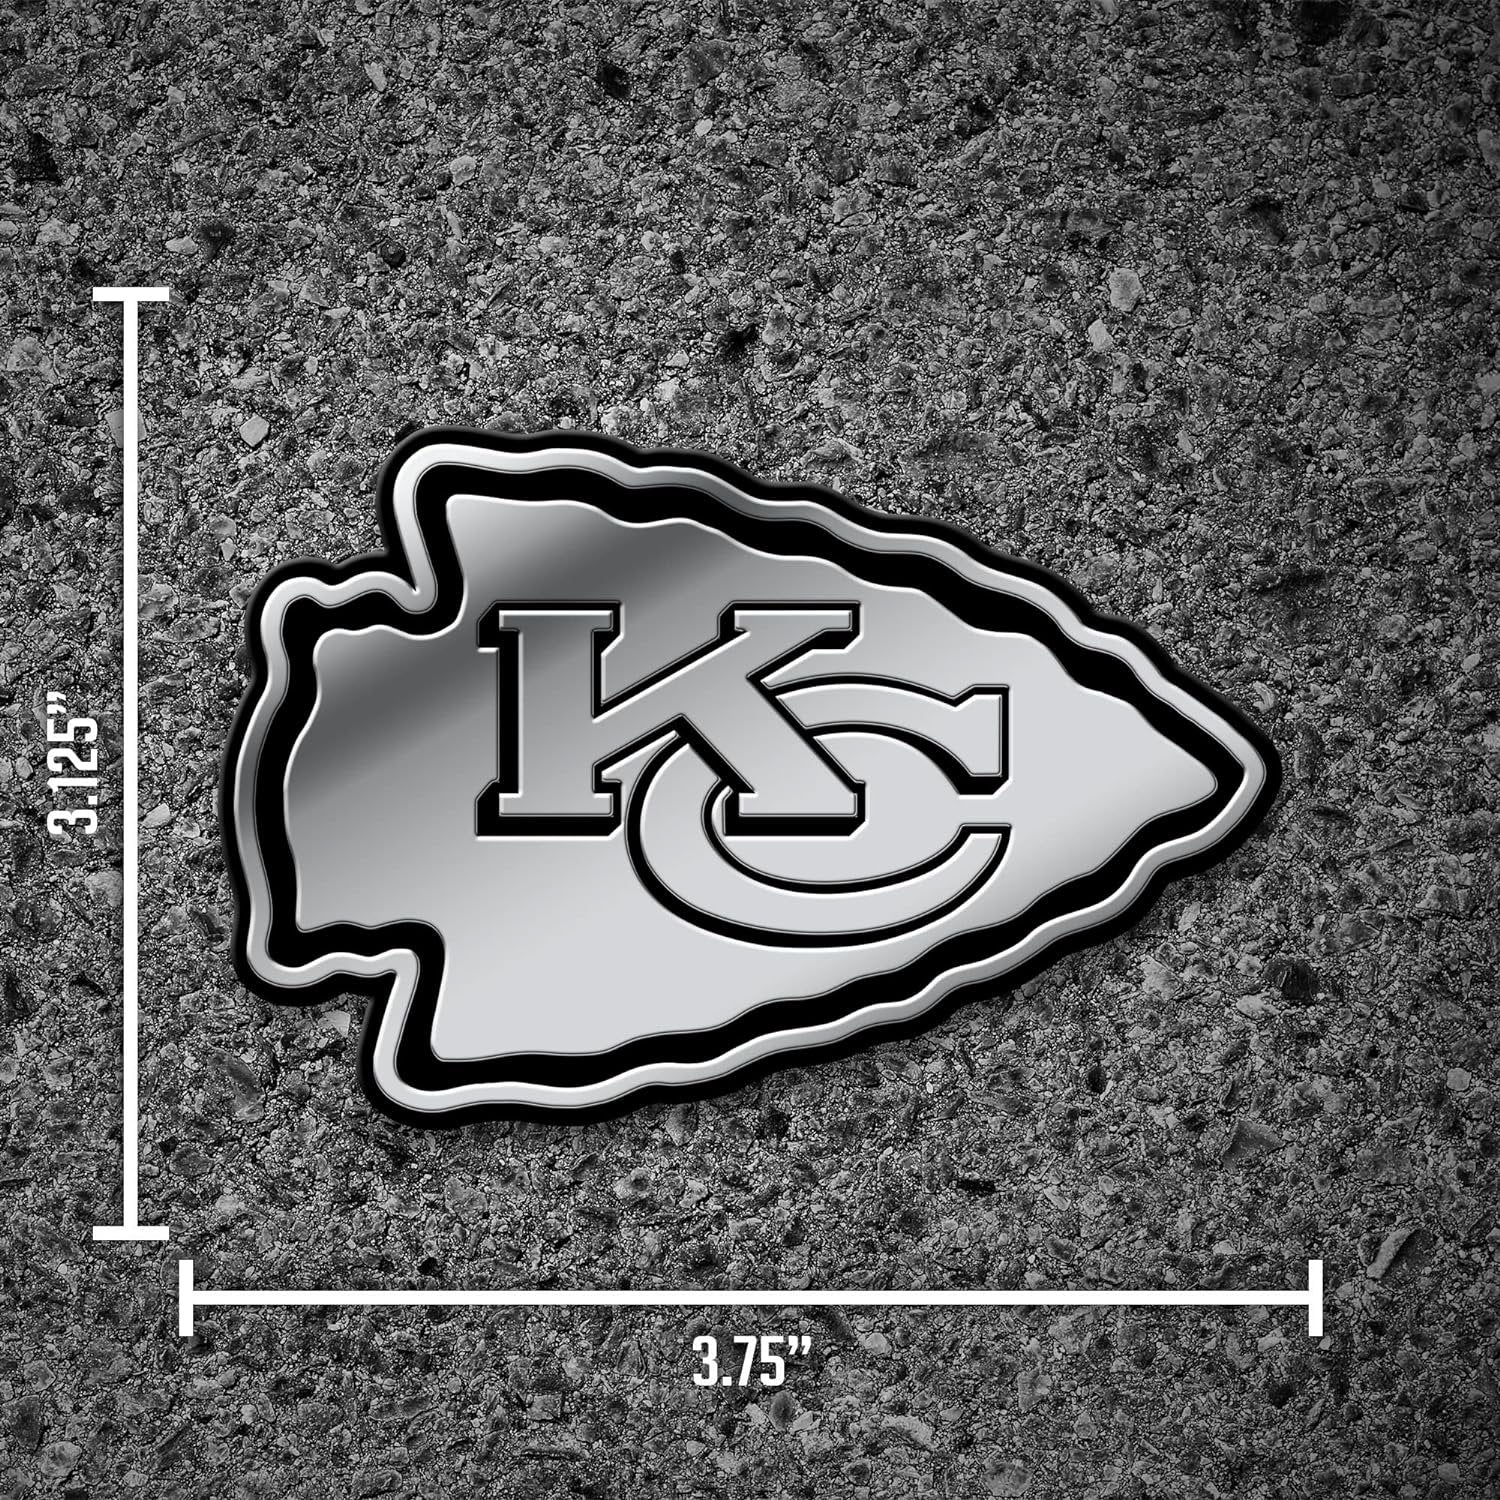 Kansas City Chiefs Auto Emblem, Silver Chrome Color, Raised Molded Plastic, 3.5 Inch, Adhesive Tape Backing